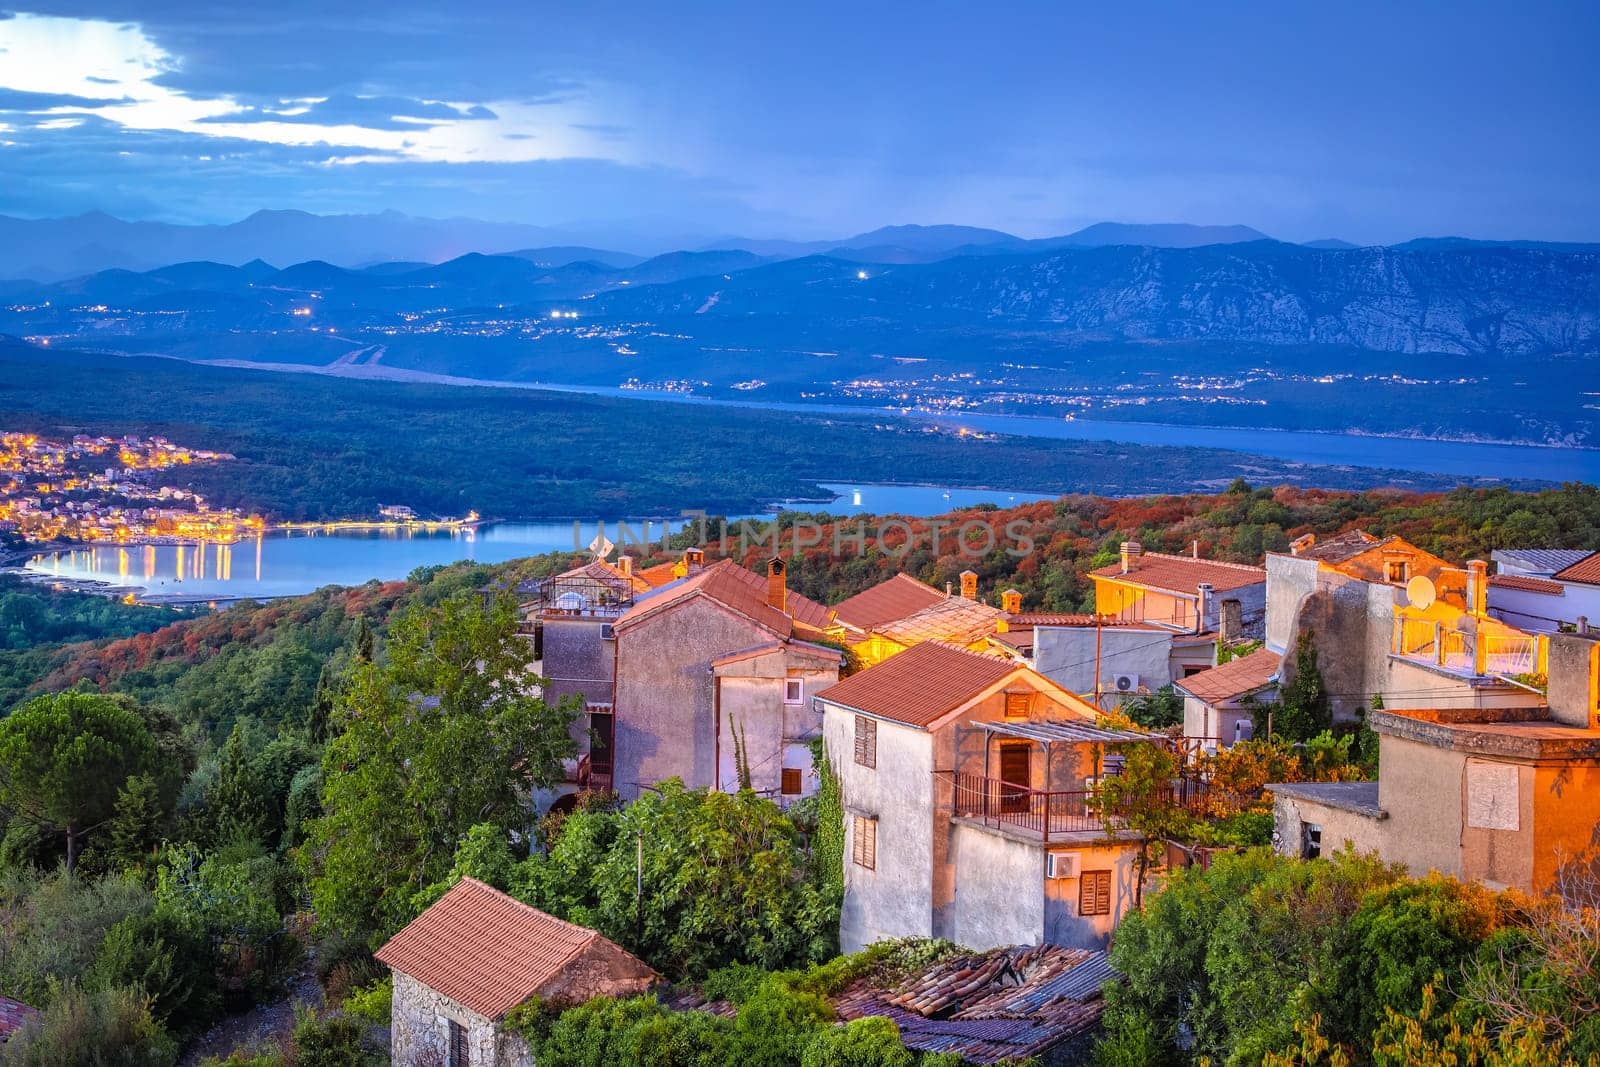 Historic town of Dobrinj and turquoise Soline bay evening view, Island of Krk, Kvarner Gulf of Croatia